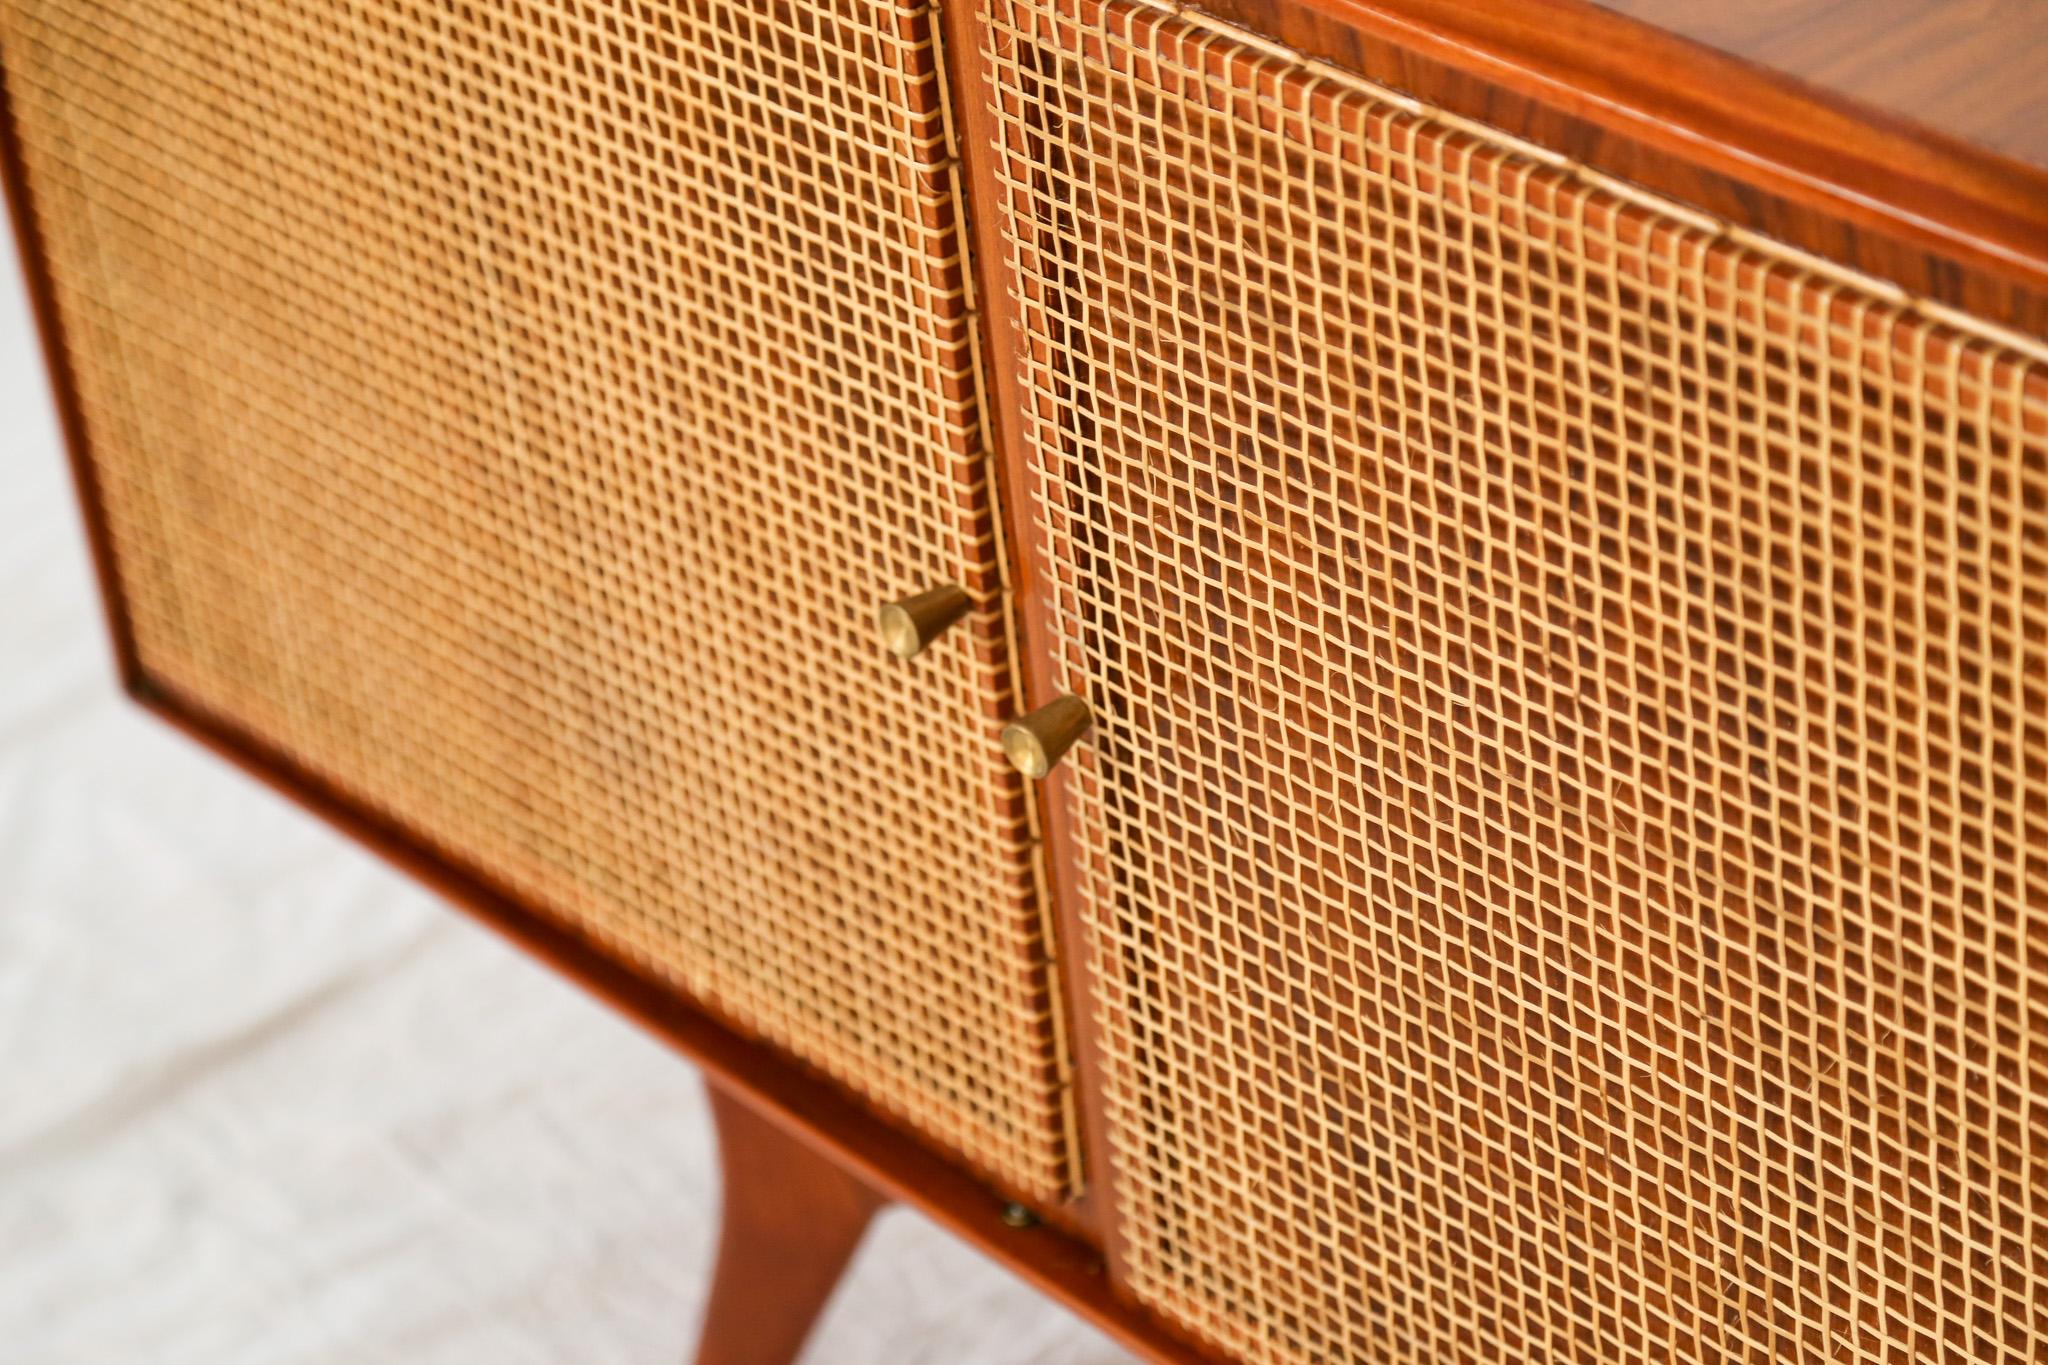 Straw 1950s Brazilian Modern Credenza in Hardwood & Caning by Forma